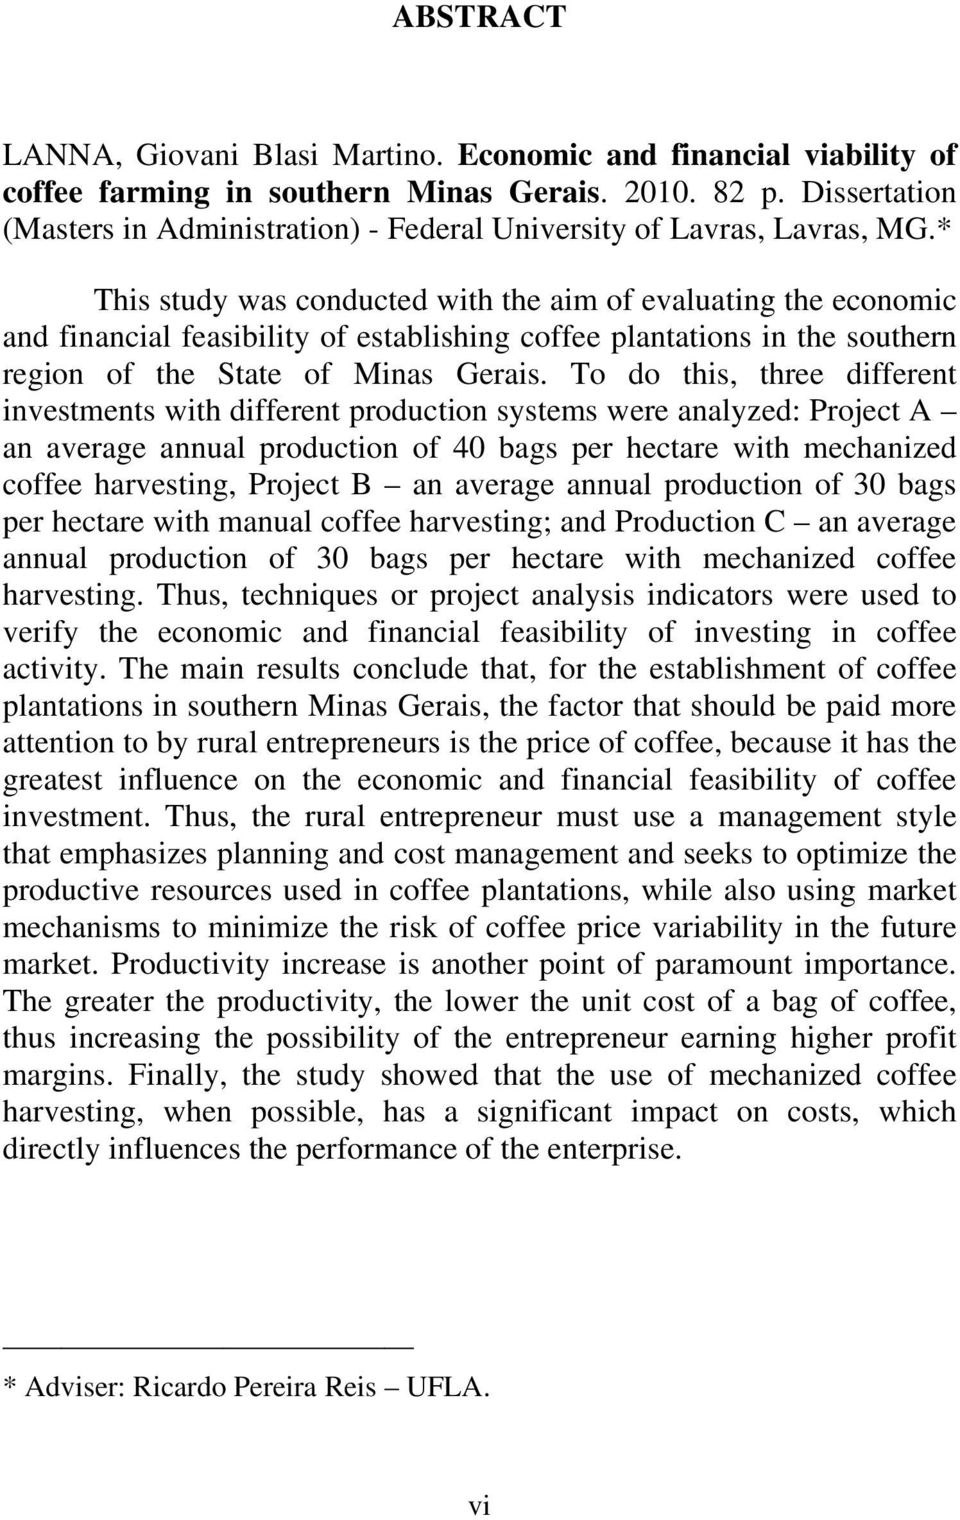 * This study was conducted with the aim of evaluating the economic and financial feasibility of establishing coffee plantations in the southern region of the State of Minas Gerais.